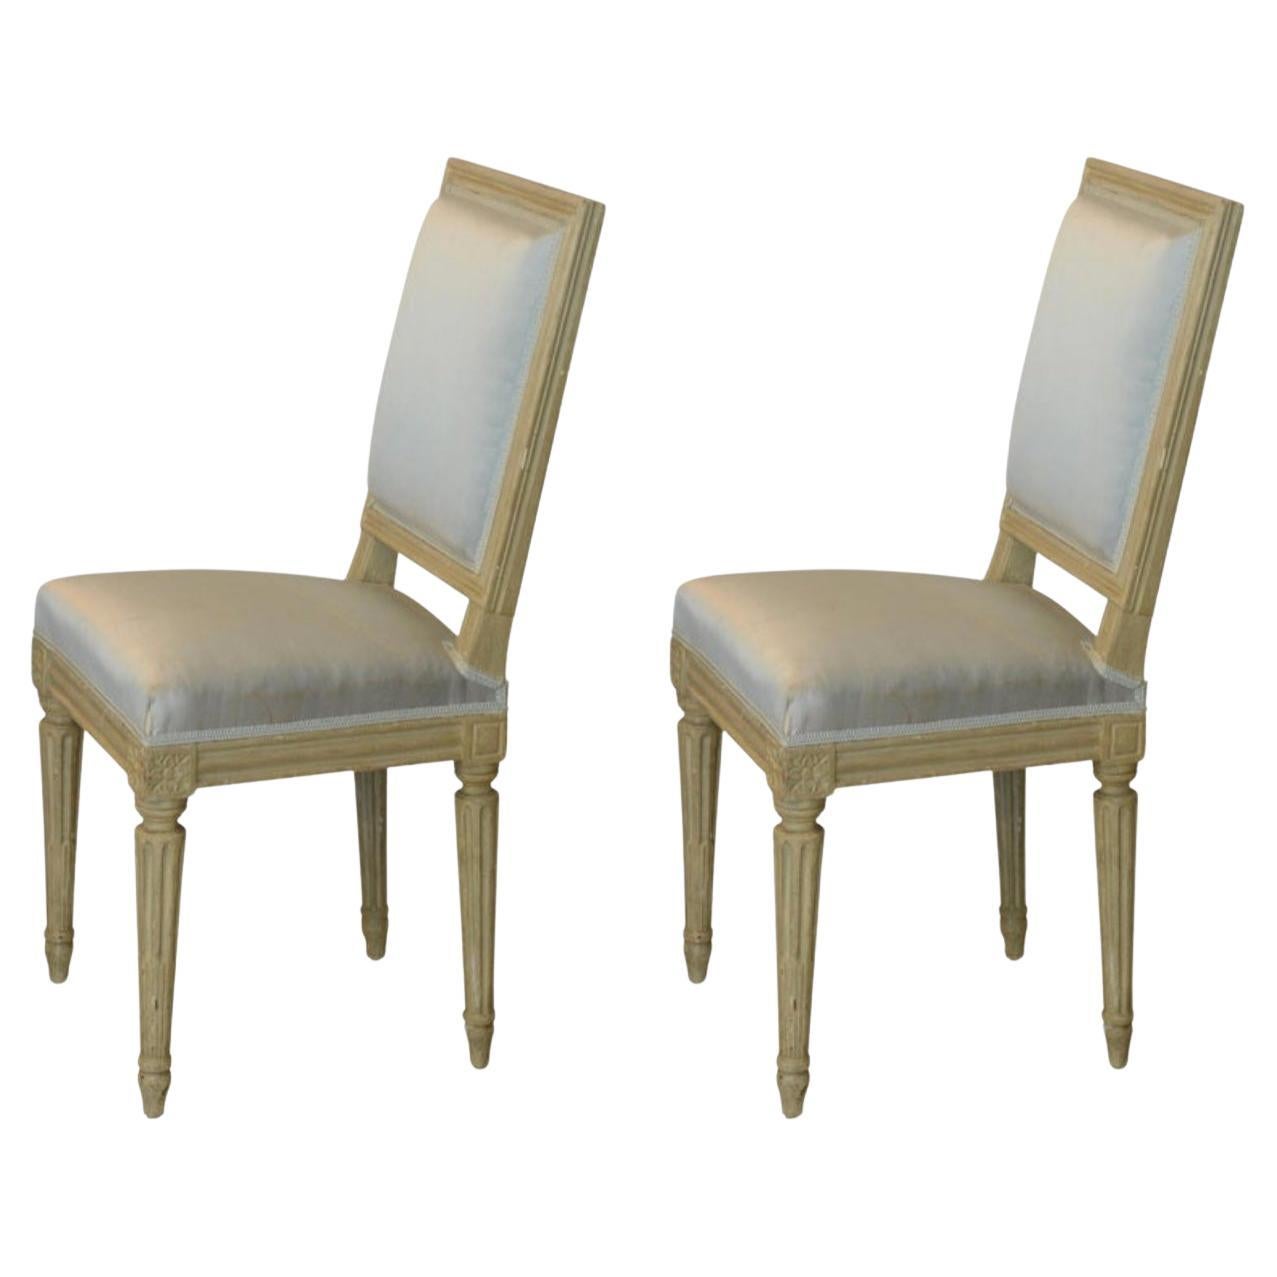 Pair of Louis XVI Style Side Chairs by Armand-Albert Rateau